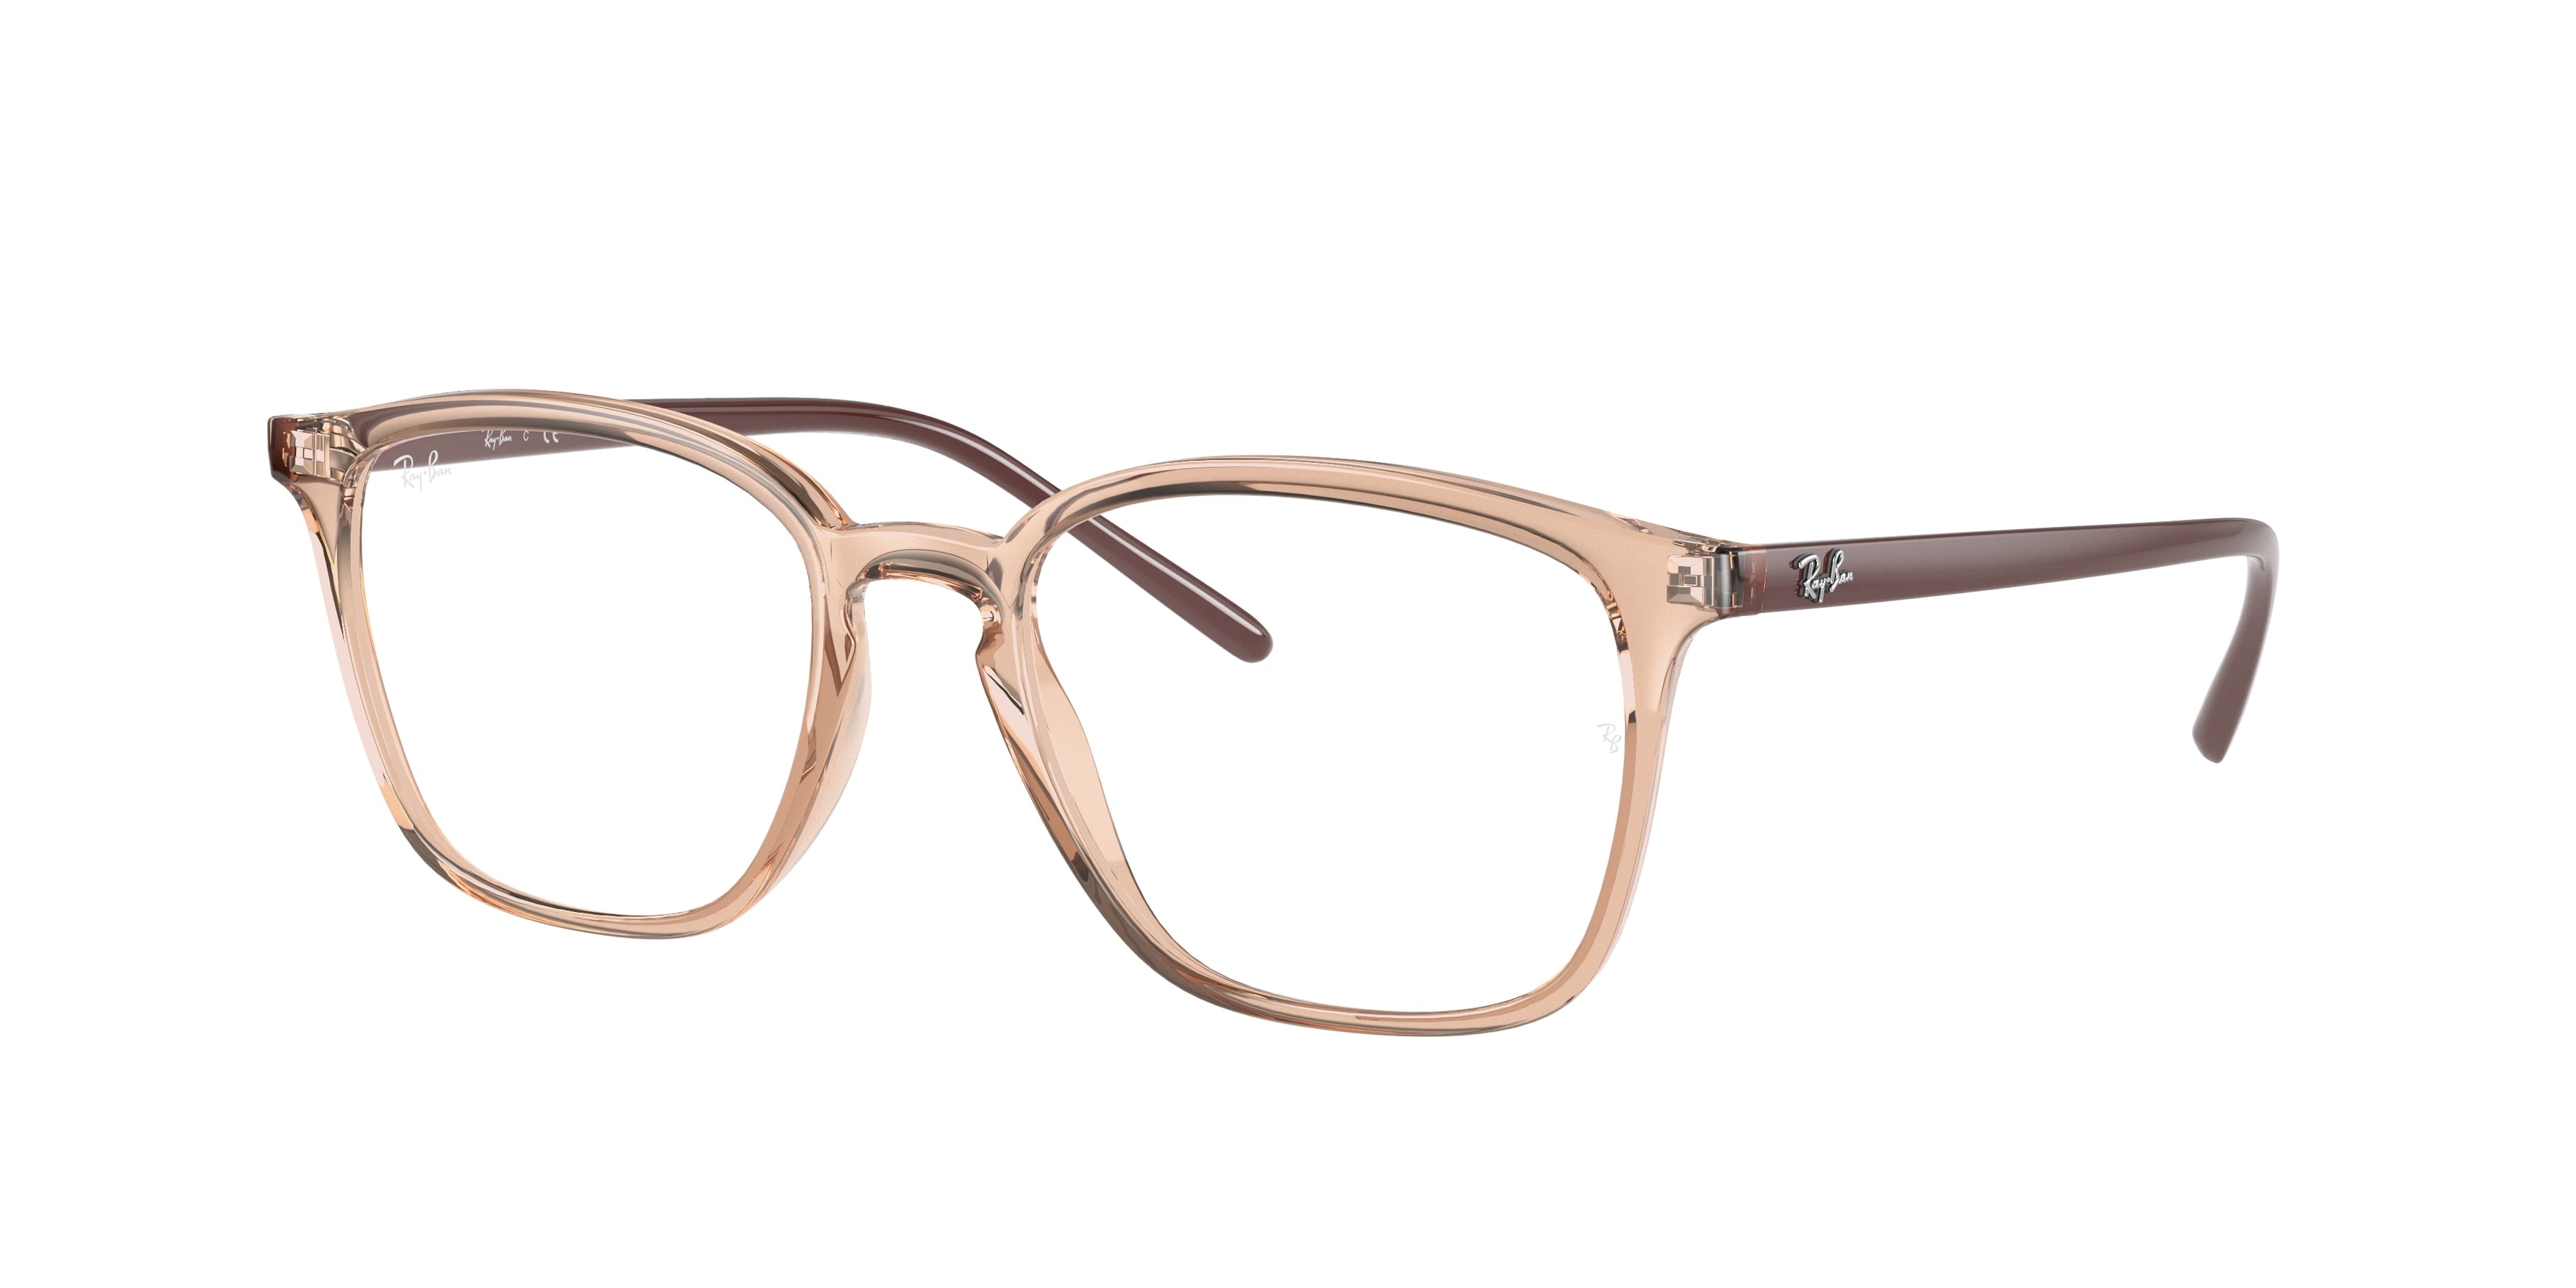 Ray-Ban Optical RX7185 Square Eyeglasses  5940-Light Brown 52-145-18 - Color Map Brown